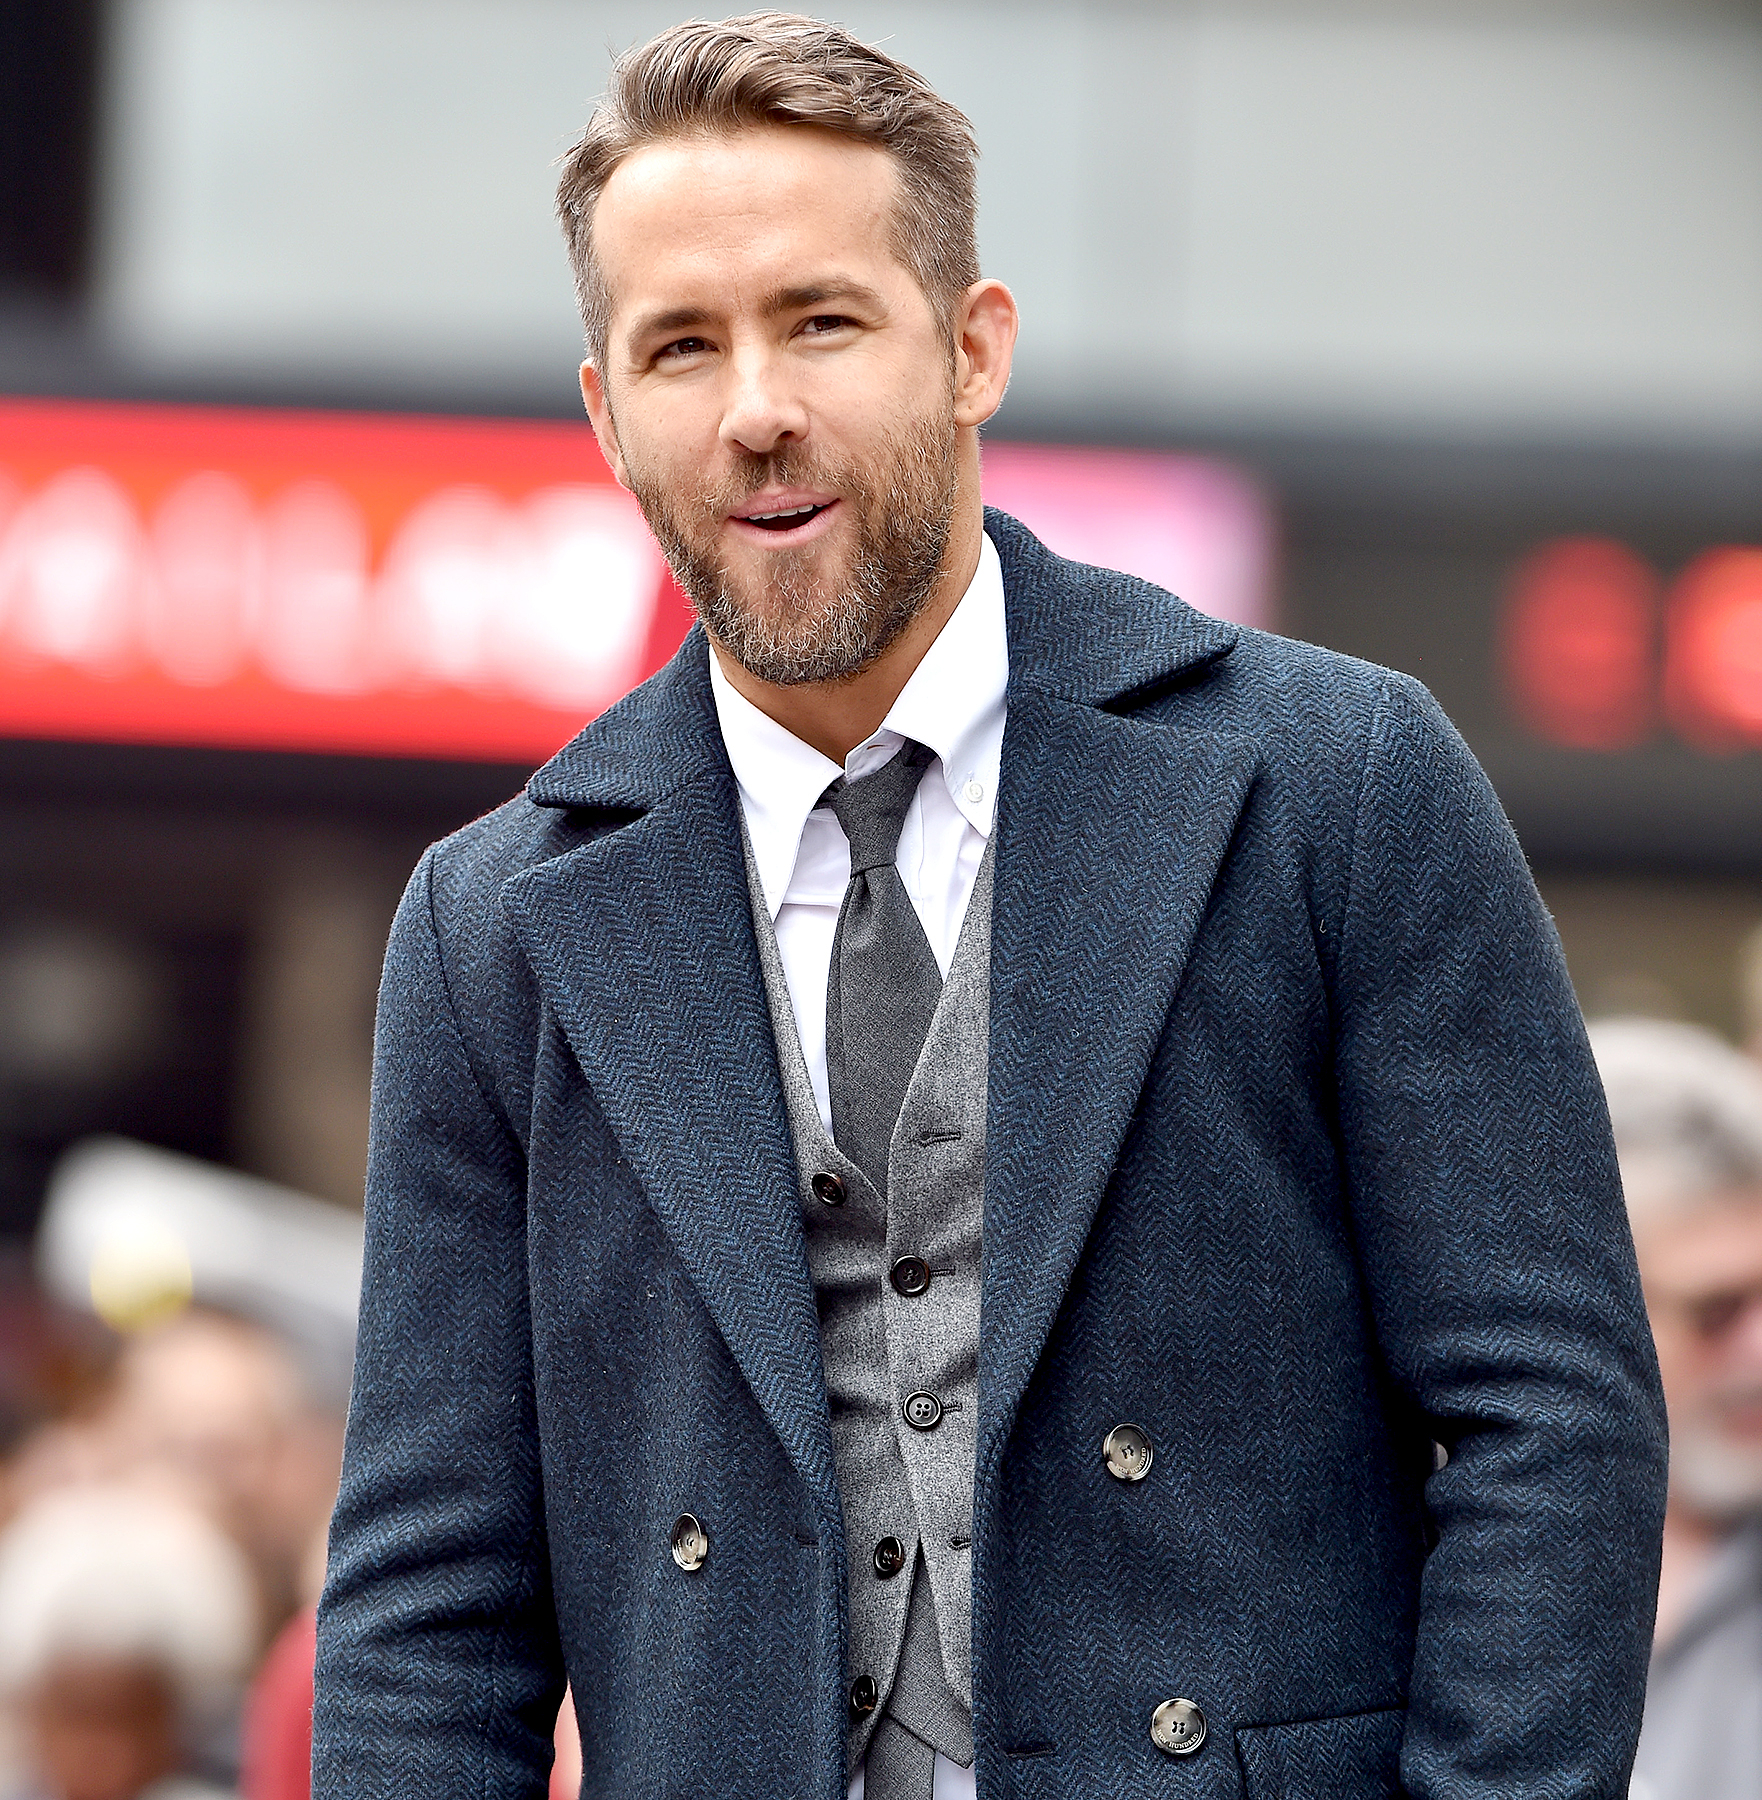 Blake Lively is tempted to get thigh tattoo of Ryan Reynolds face   English Movie News  Times of India